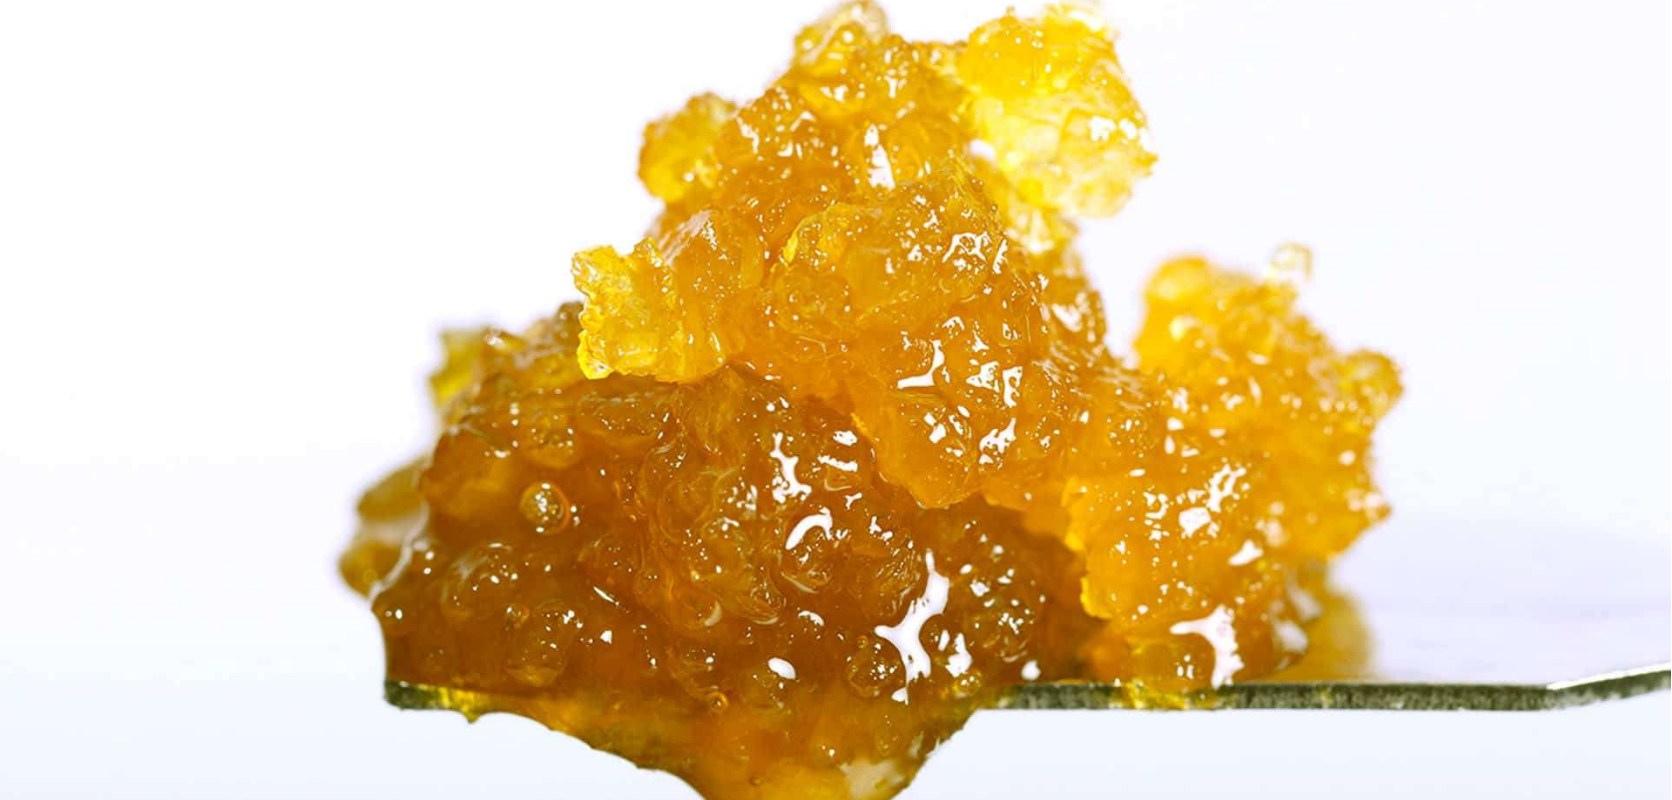 Where to buy dabs? Head to Low Price Bud, a trusted online weed dispensary in Canada. 